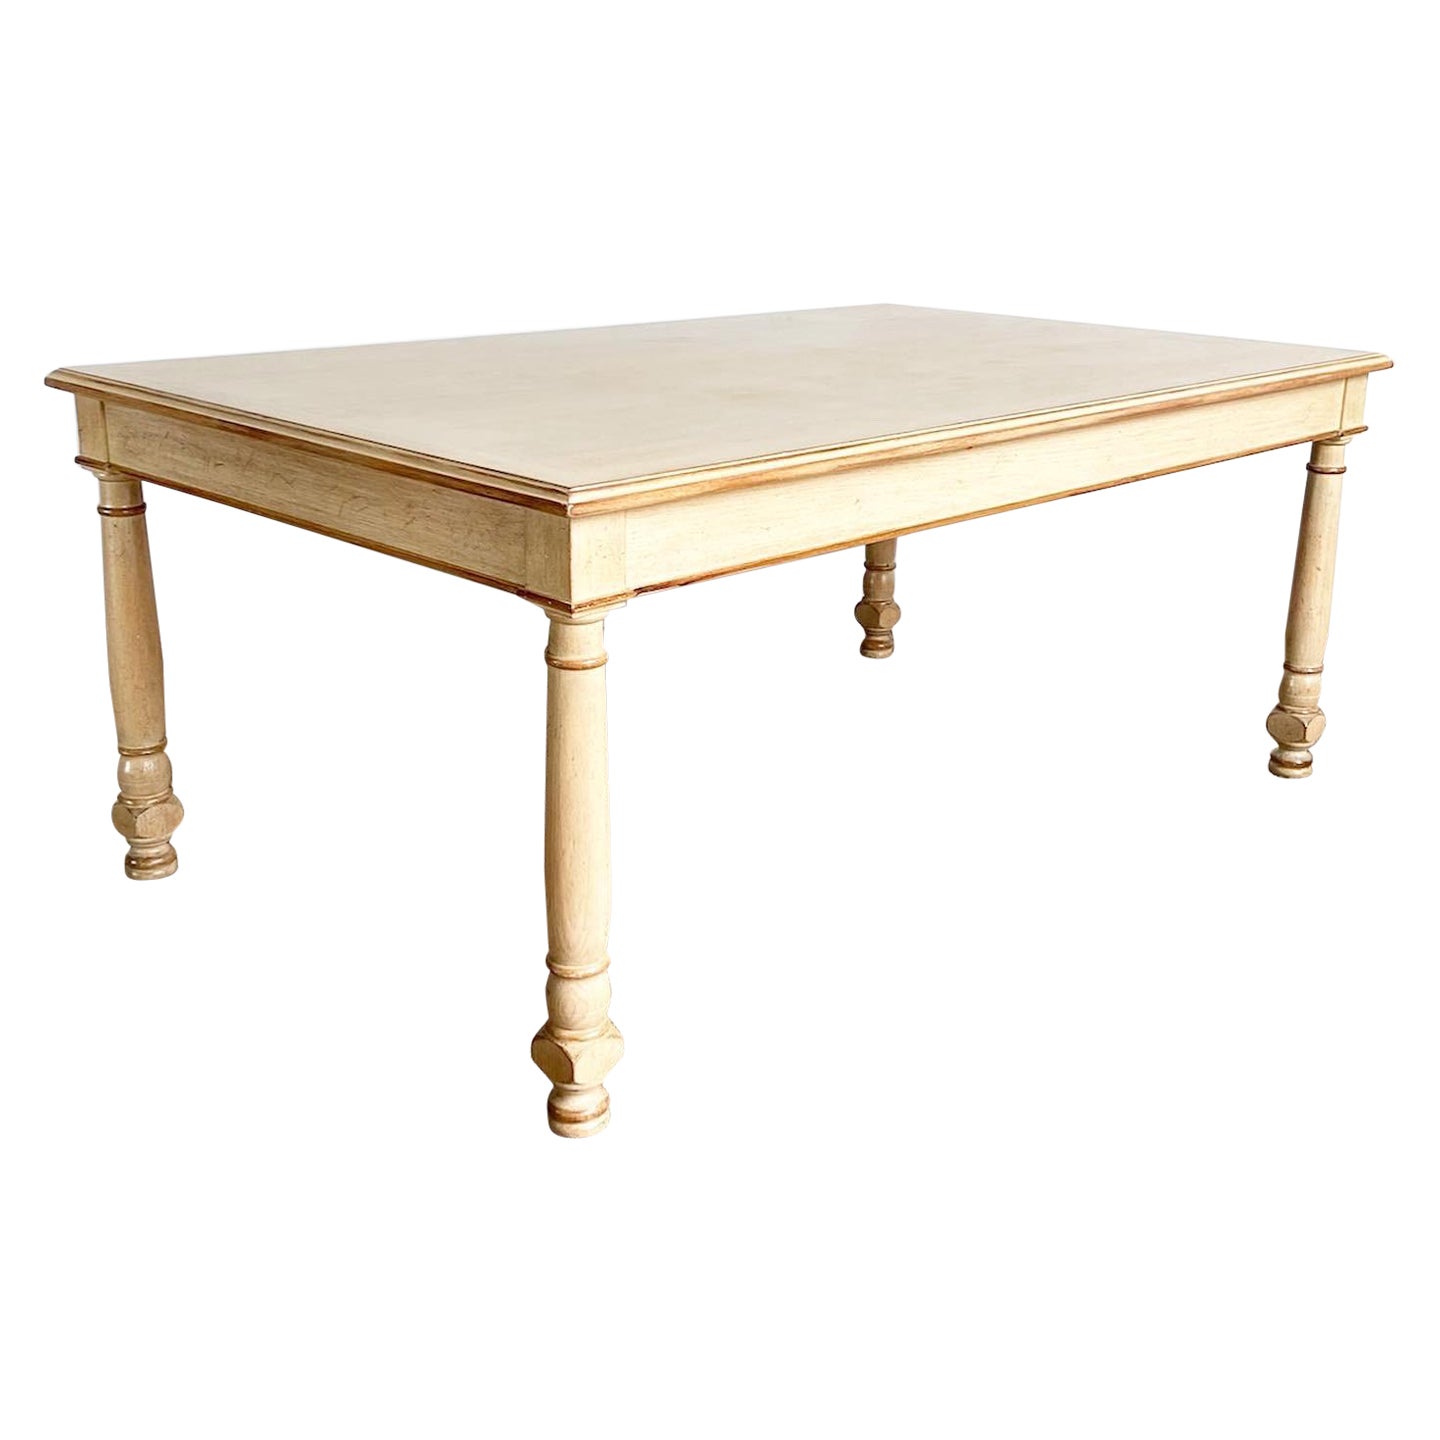 Rustic Regency Chic White Wash Wooden Dining Table For Sale